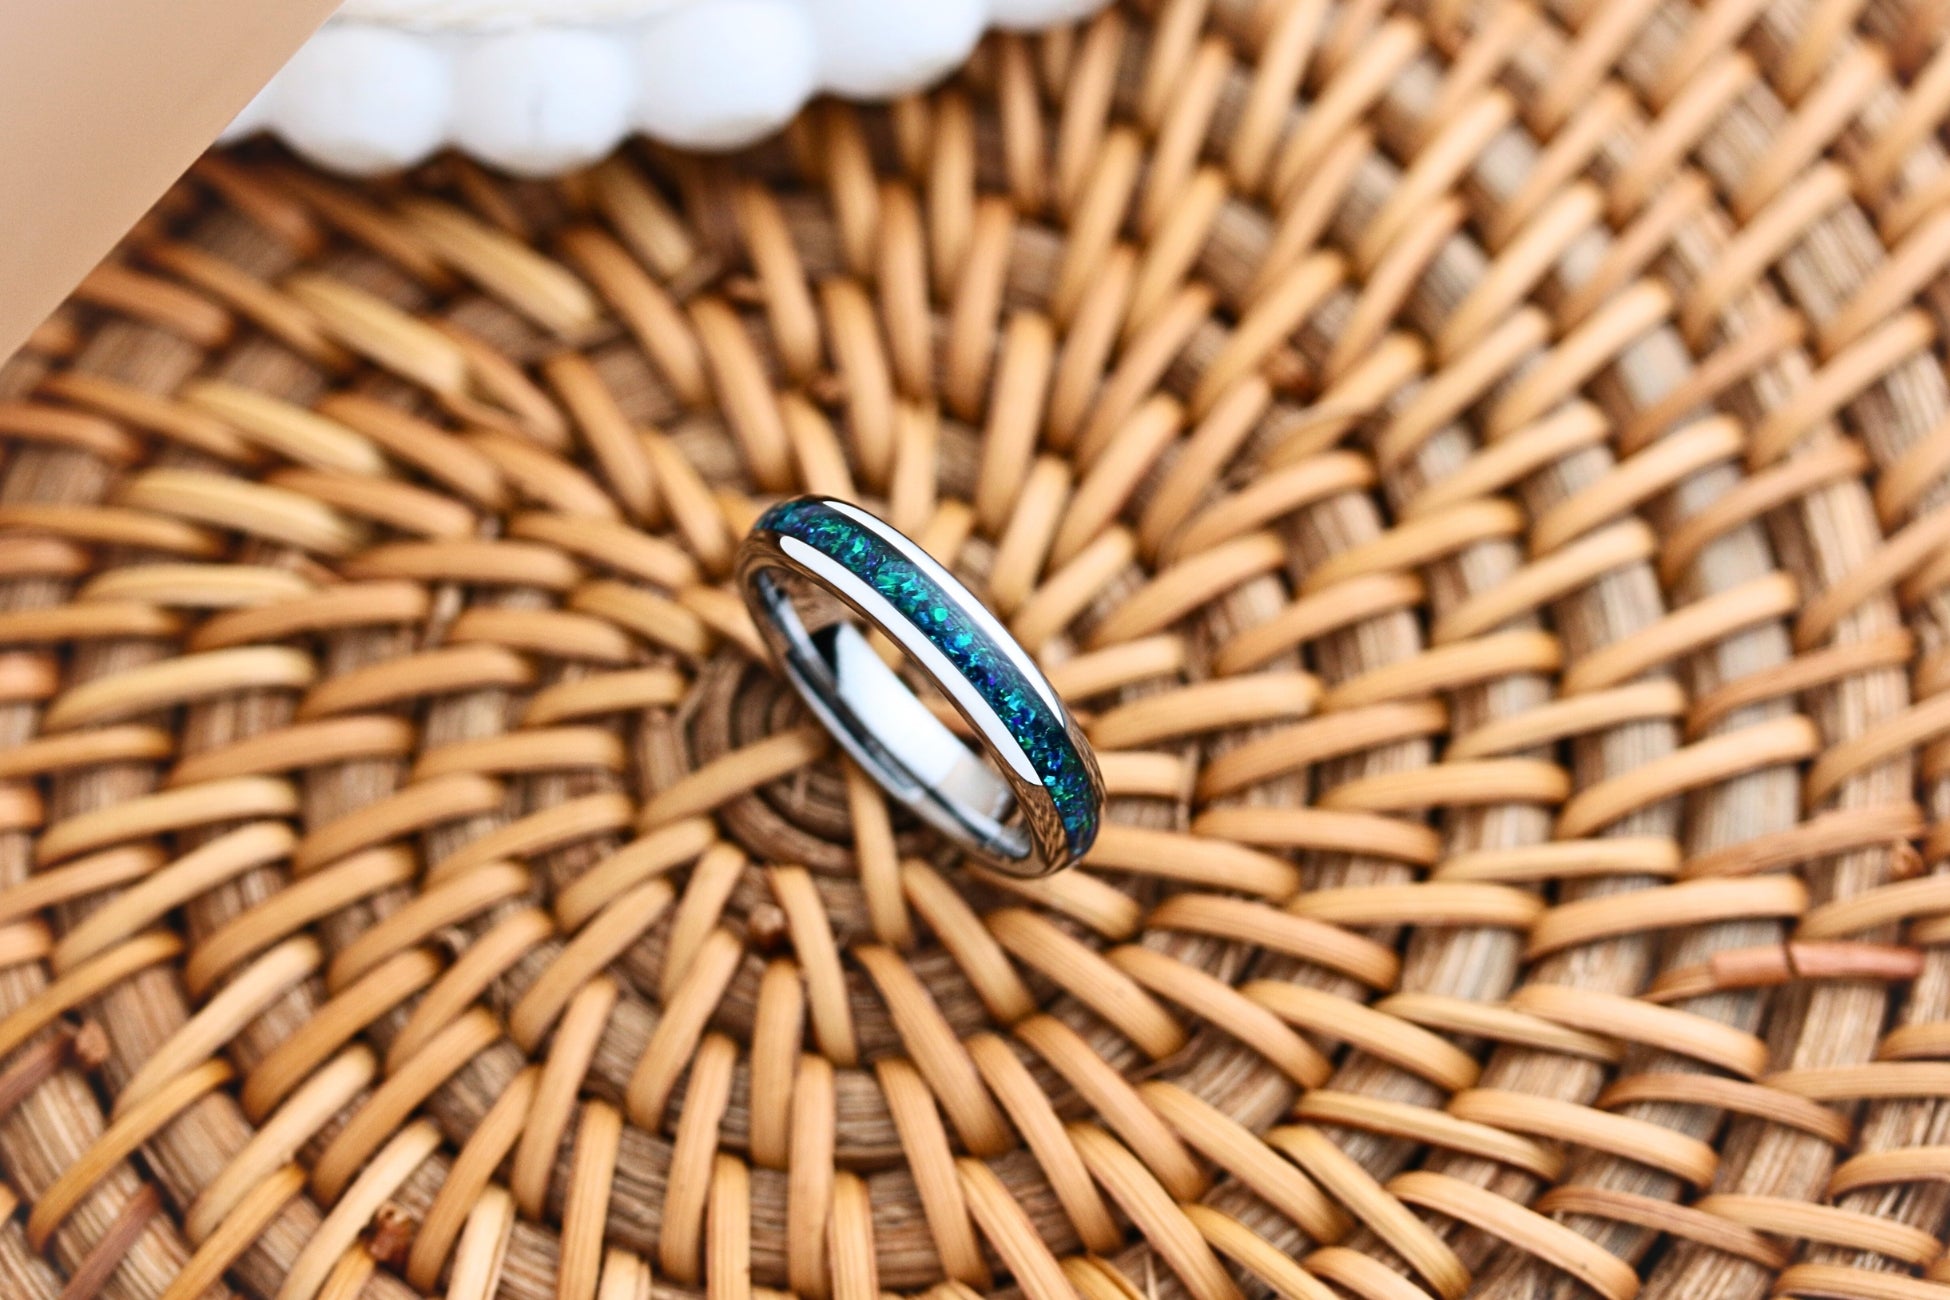 Women's Wedding Bands Made With Wood, Antler, Opal, Rose Gold and Other Materials Like Tungsten Carbide